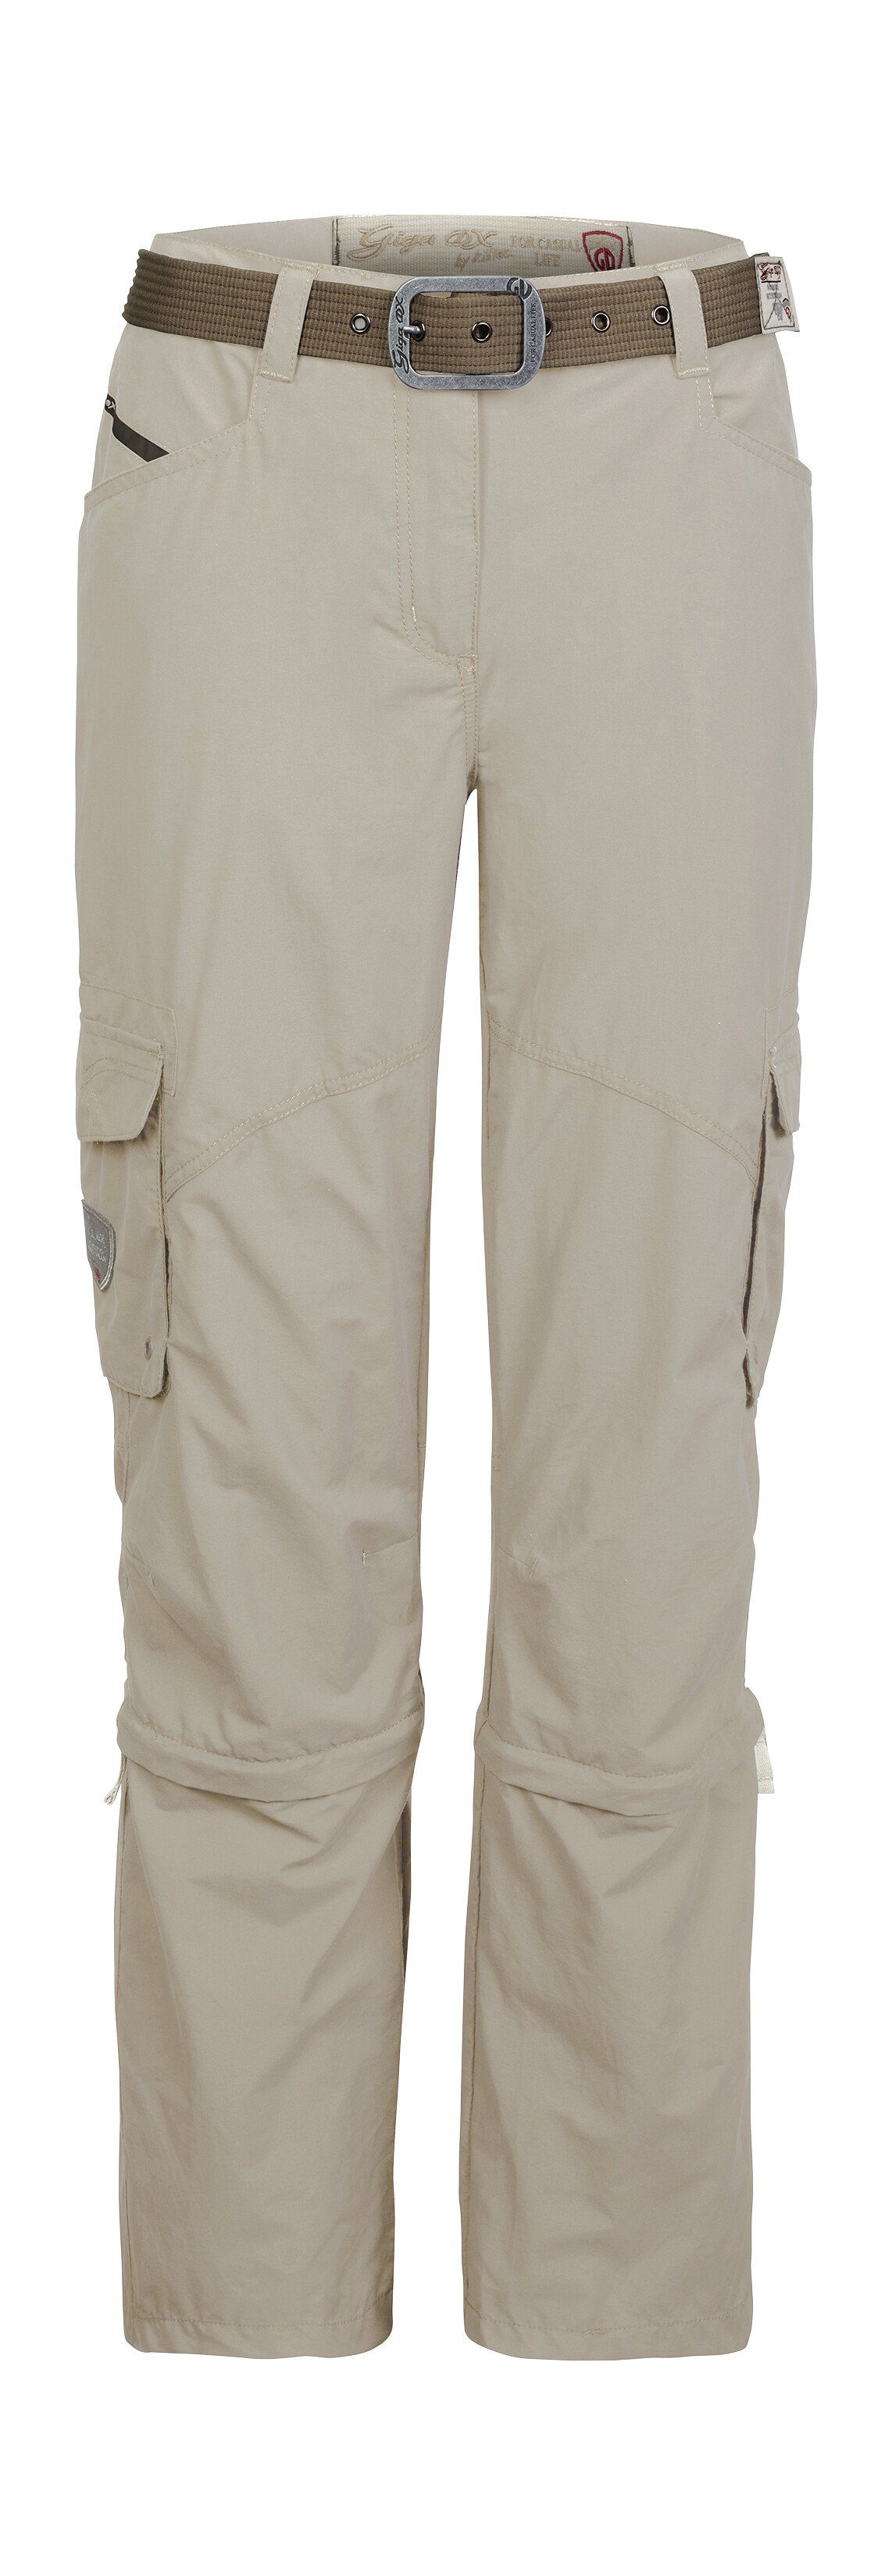 G.I.G.A. DX 37 WMN GS killtec by PNTS hellbeige Zip-off-Hose